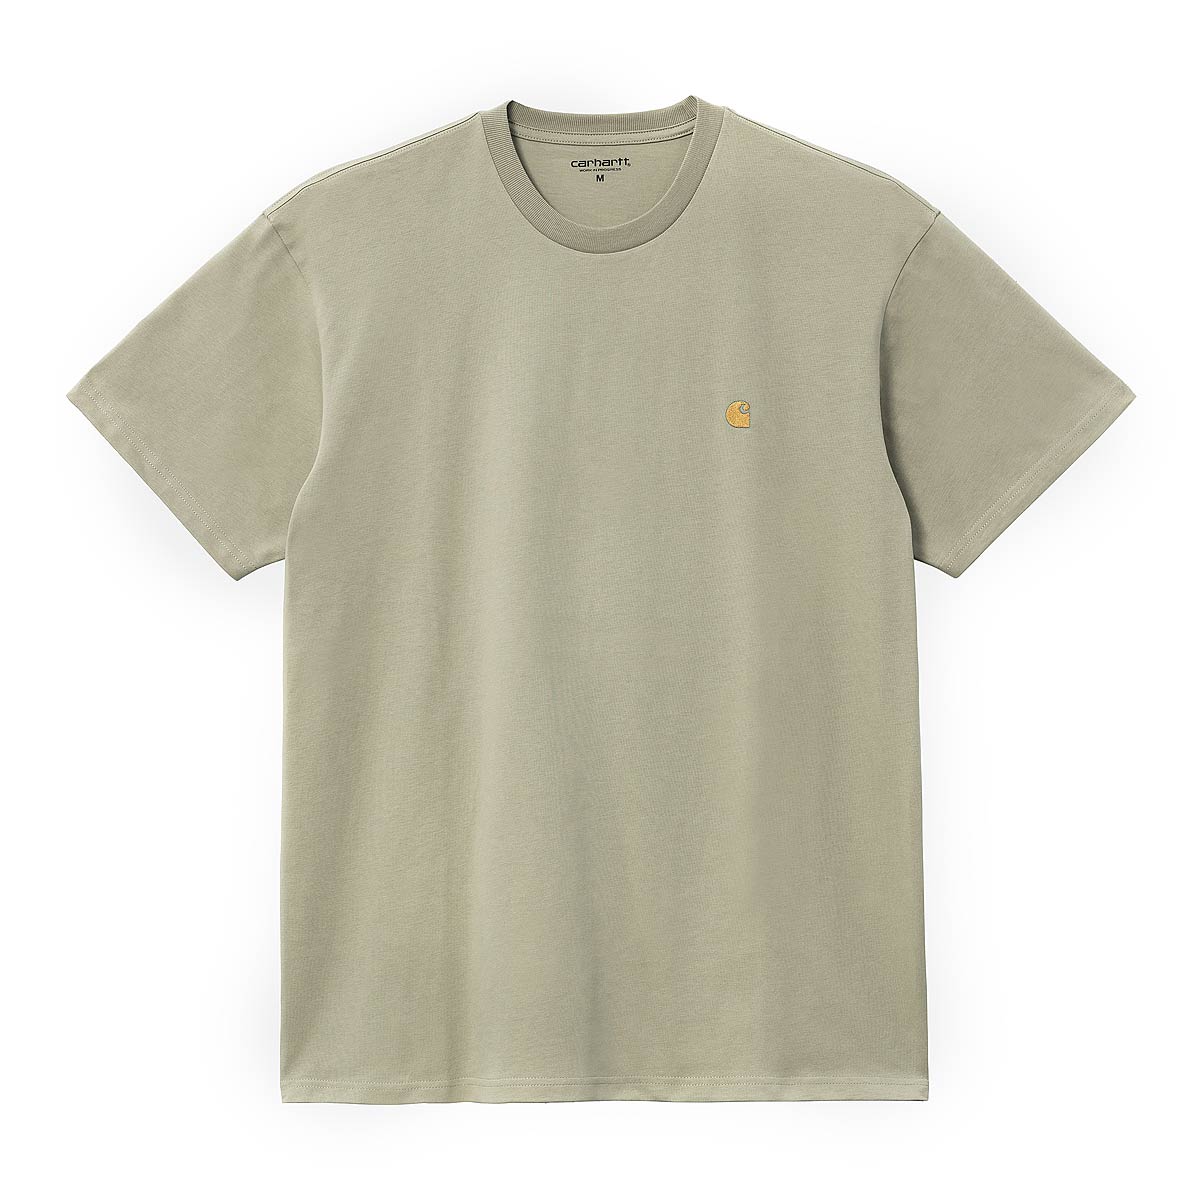 Carhartt Wip S/s Chase T-shirt, Agave / Gold